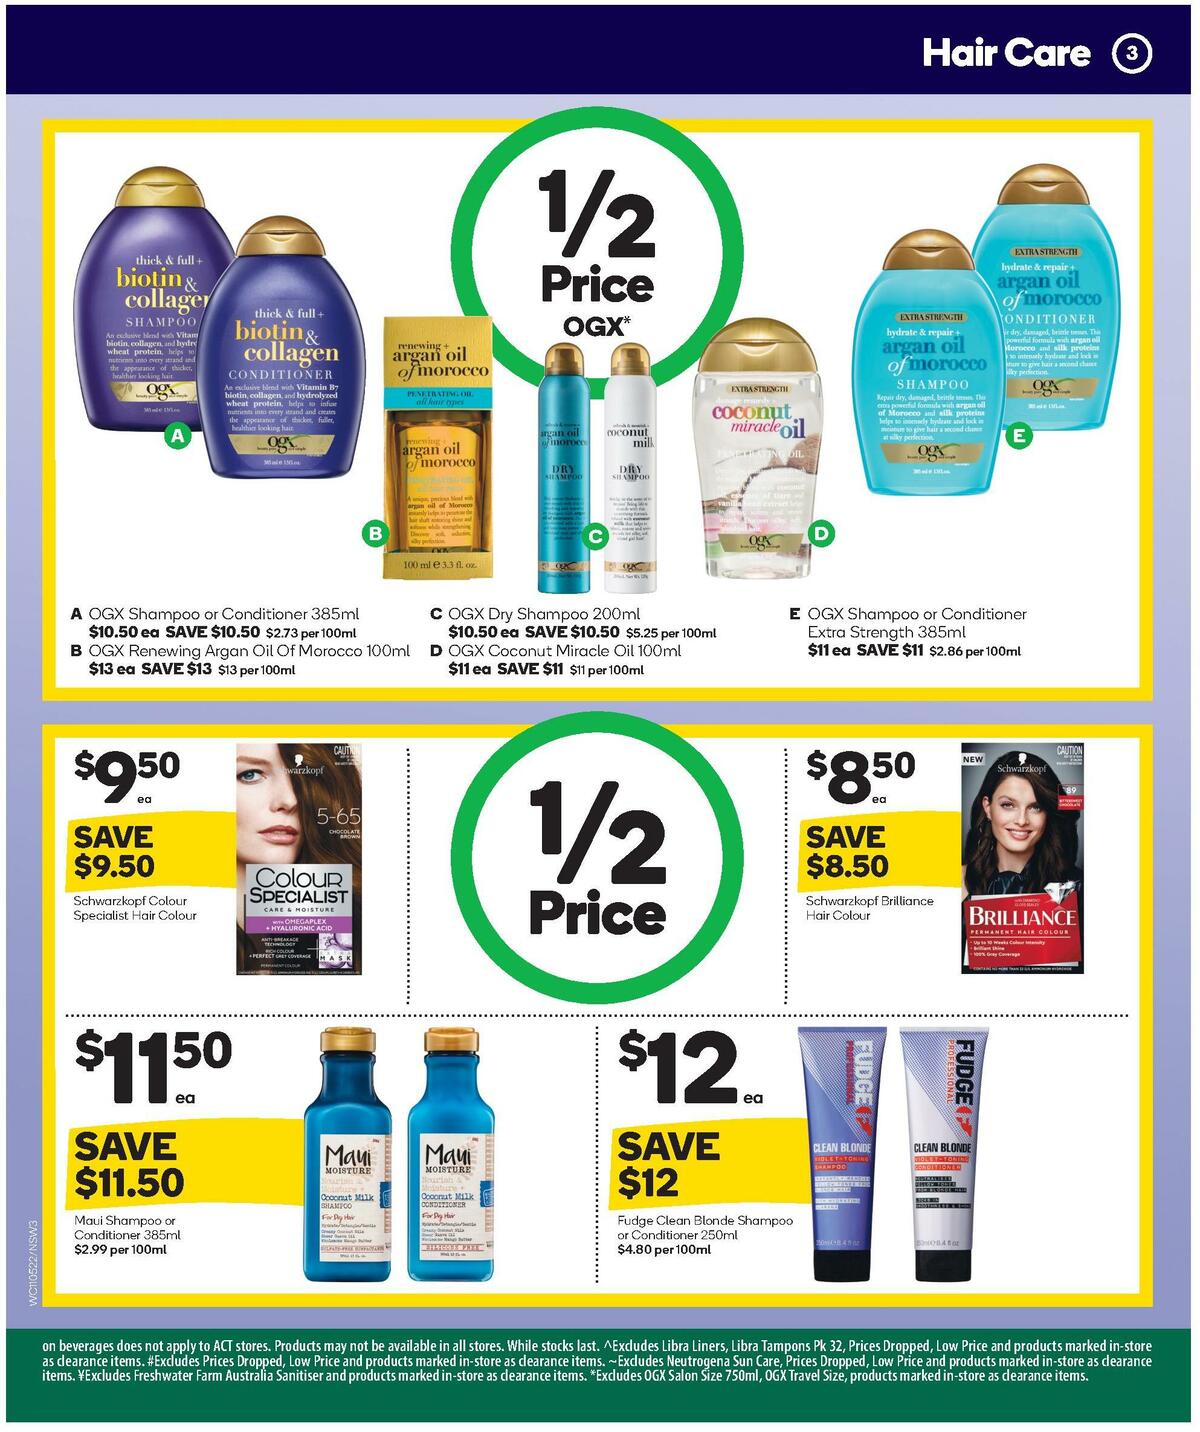 Woolworths Health & Beauty Catalogues from 11 May